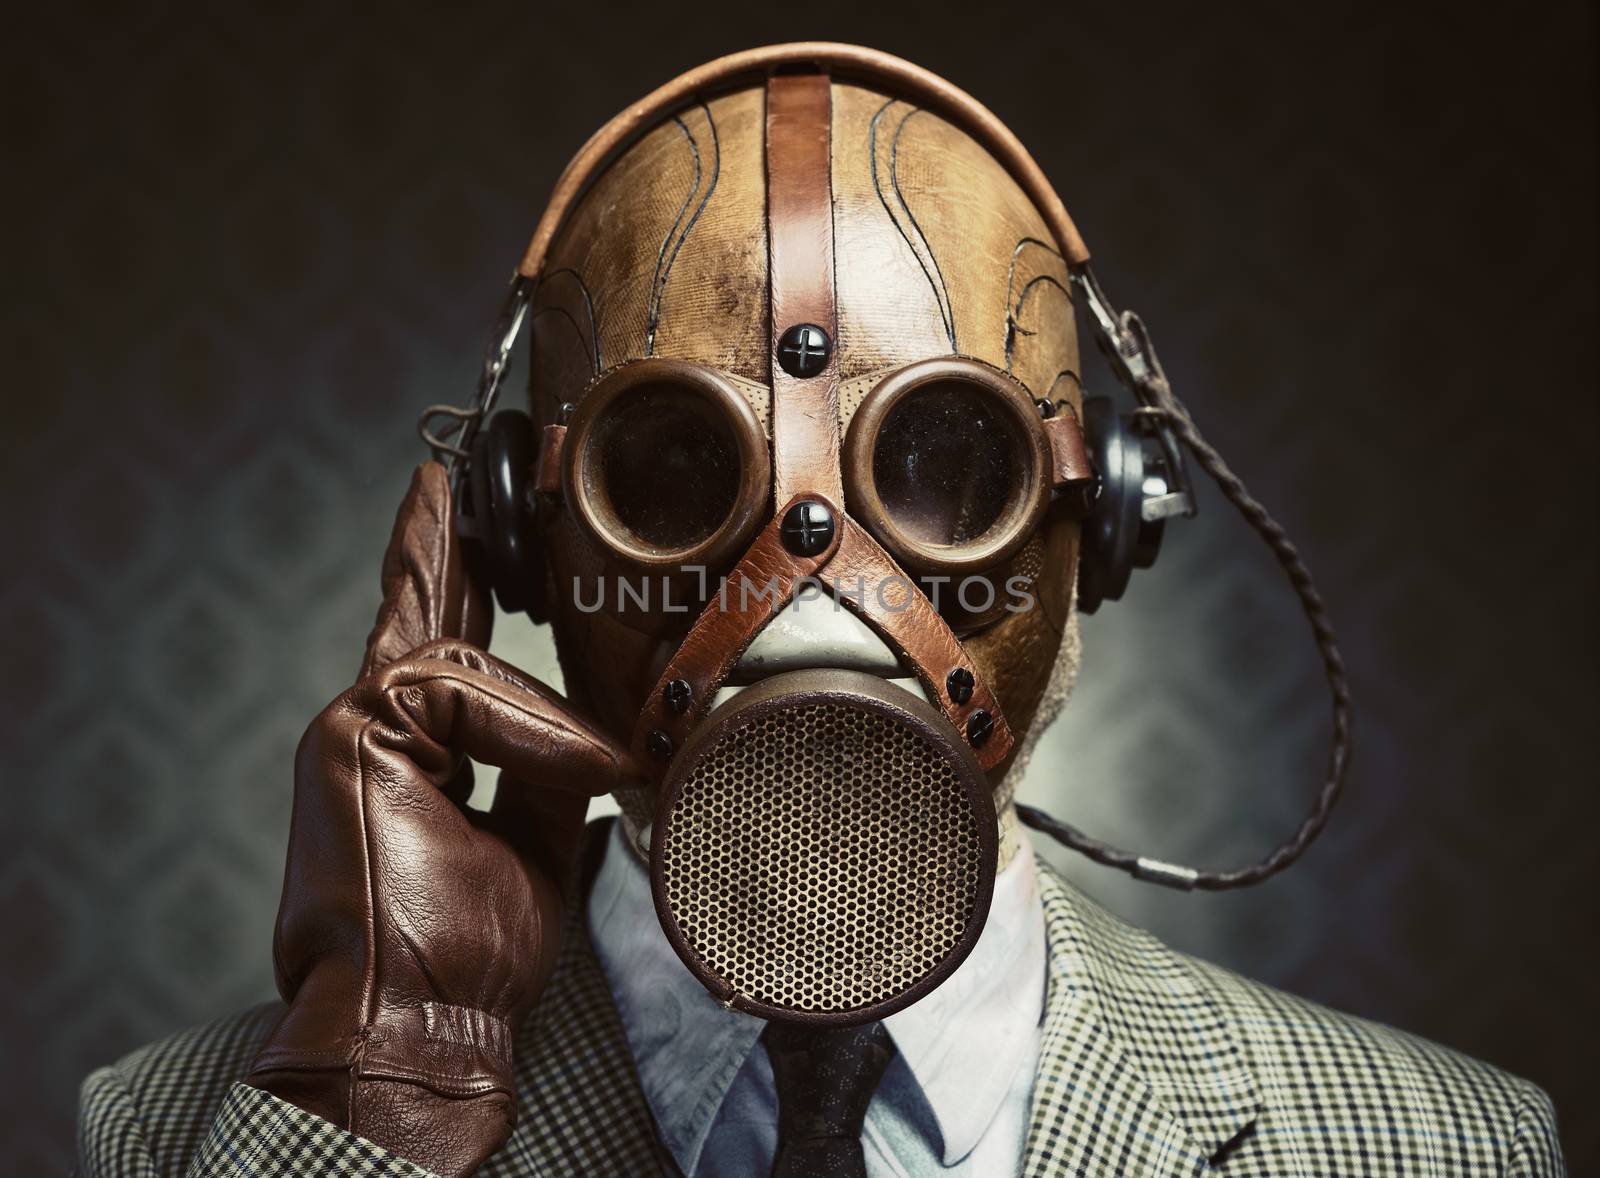 Vintage gas mask and headphones by stokkete